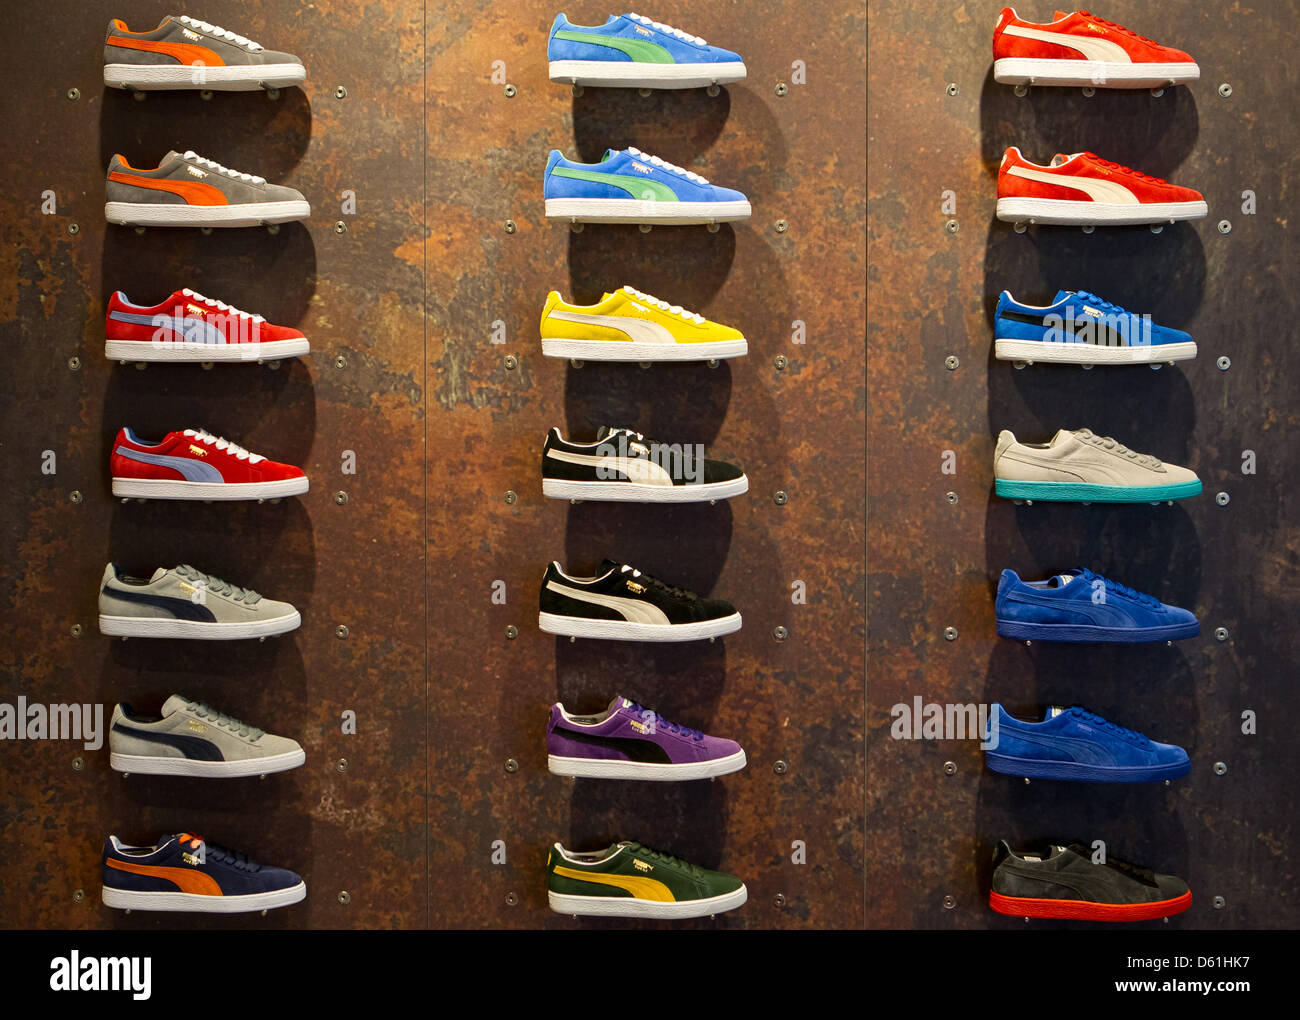 Shoes of the sportswear manufacturer Puma are displayed in a store in  Herzogenaurach, Germany, 24 April 2012. In 2011, Puma reached the three  billion euro turnover mark for the first time. The